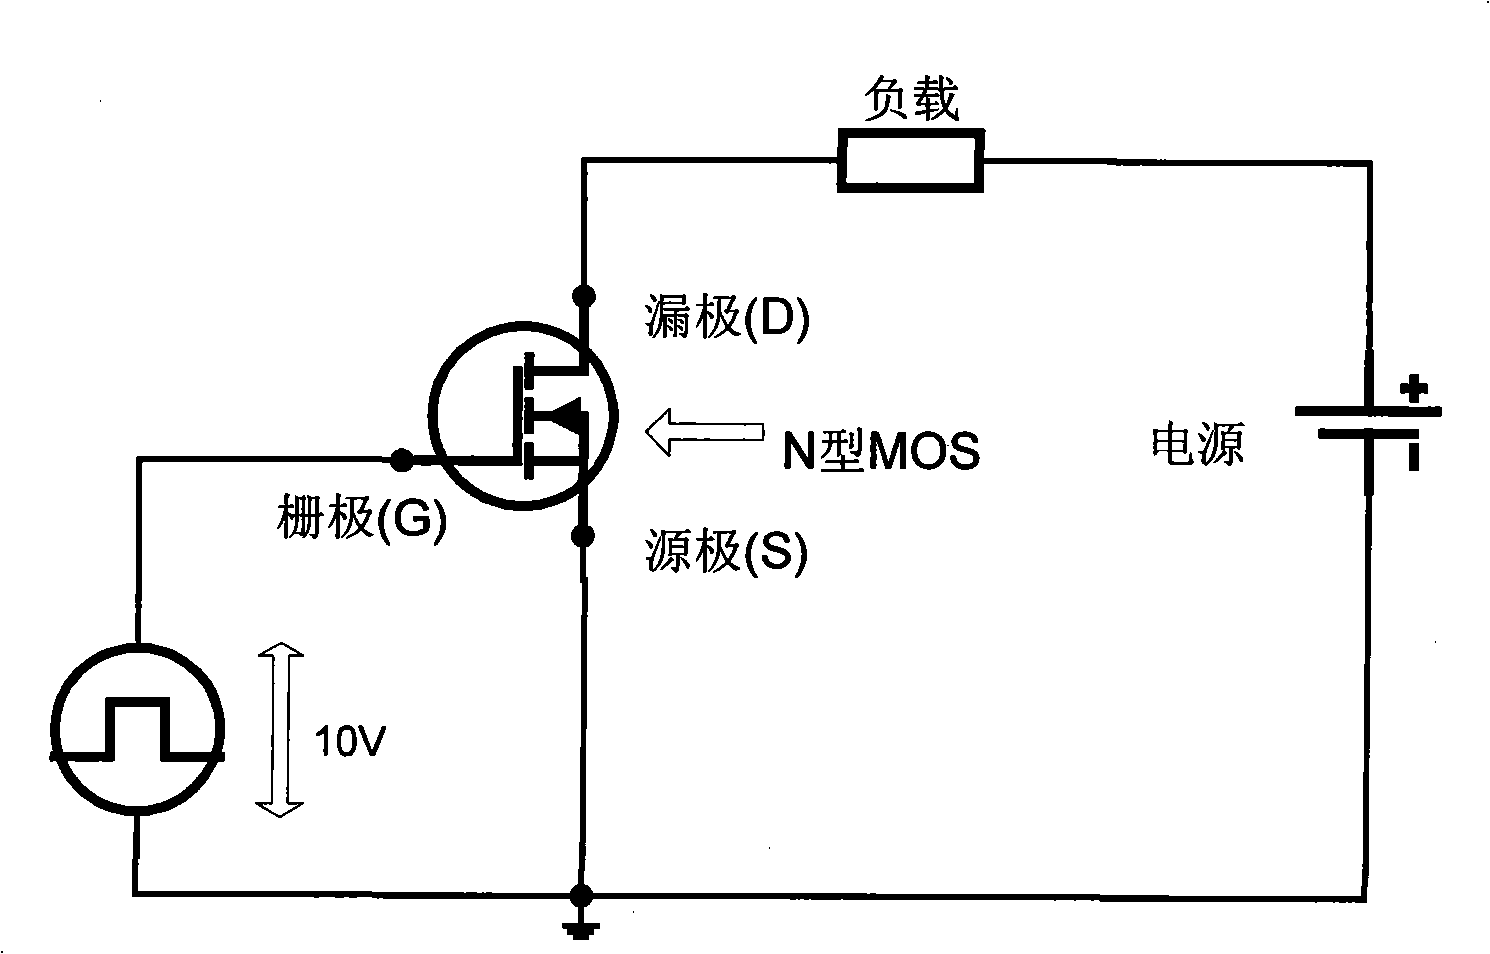 Driver circuit for P type power MOS switch tube